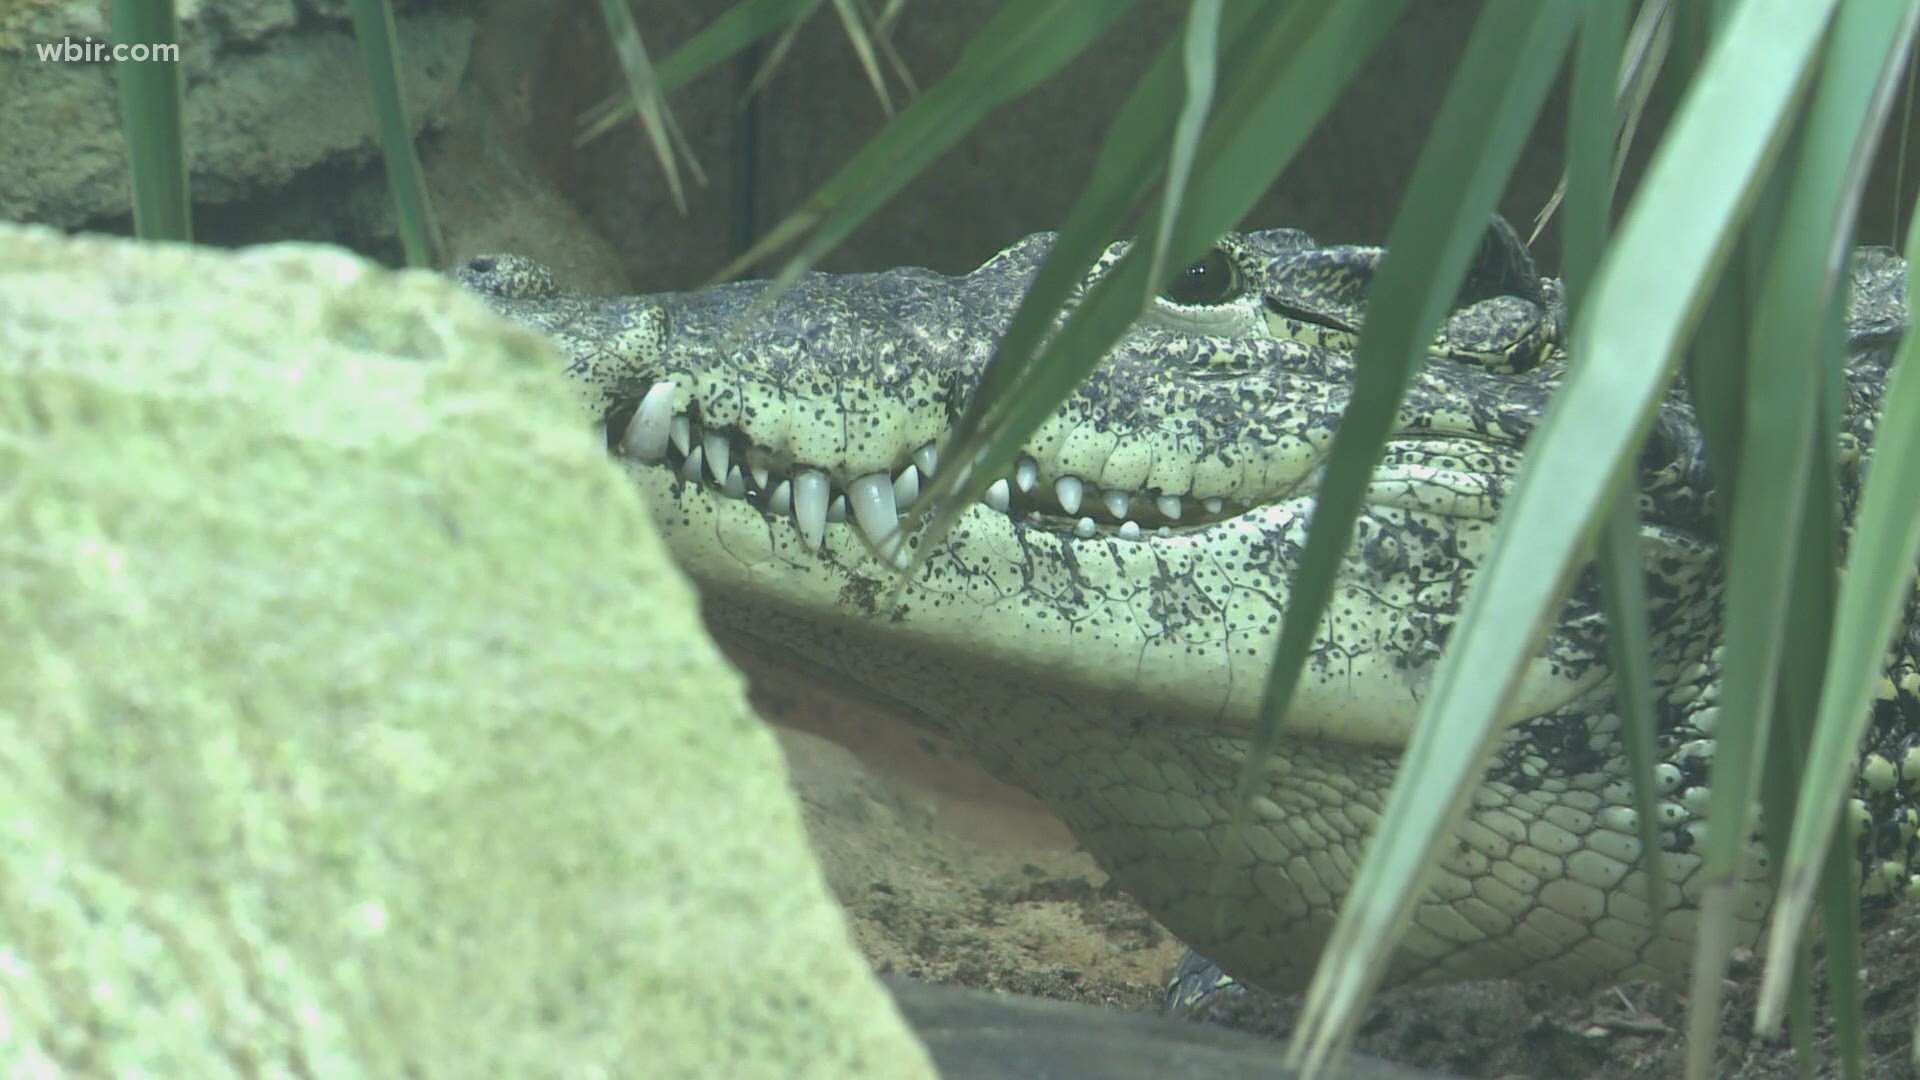 The ARC aims to boost the zoo's conservation efforts to save endangered amphibians and reptiles.